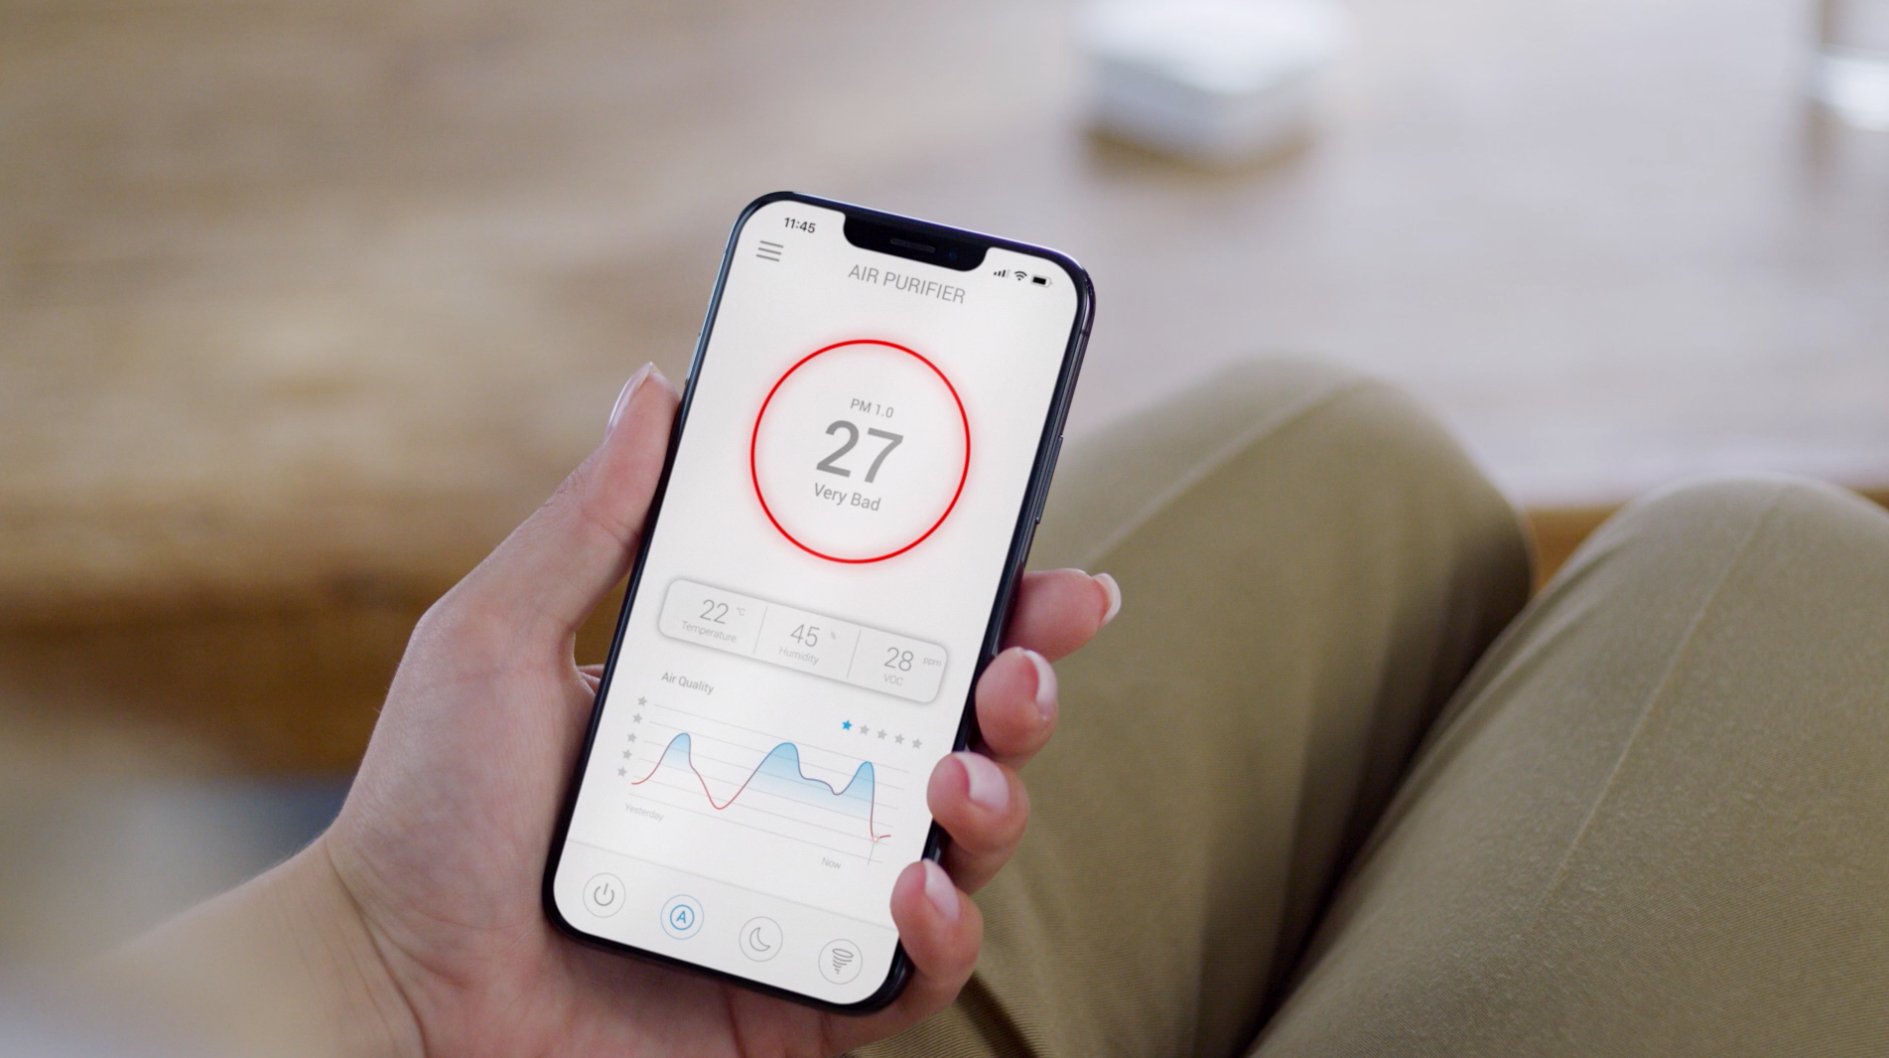 OneLife Air Purifier's measurements displayed within an app on a phone.